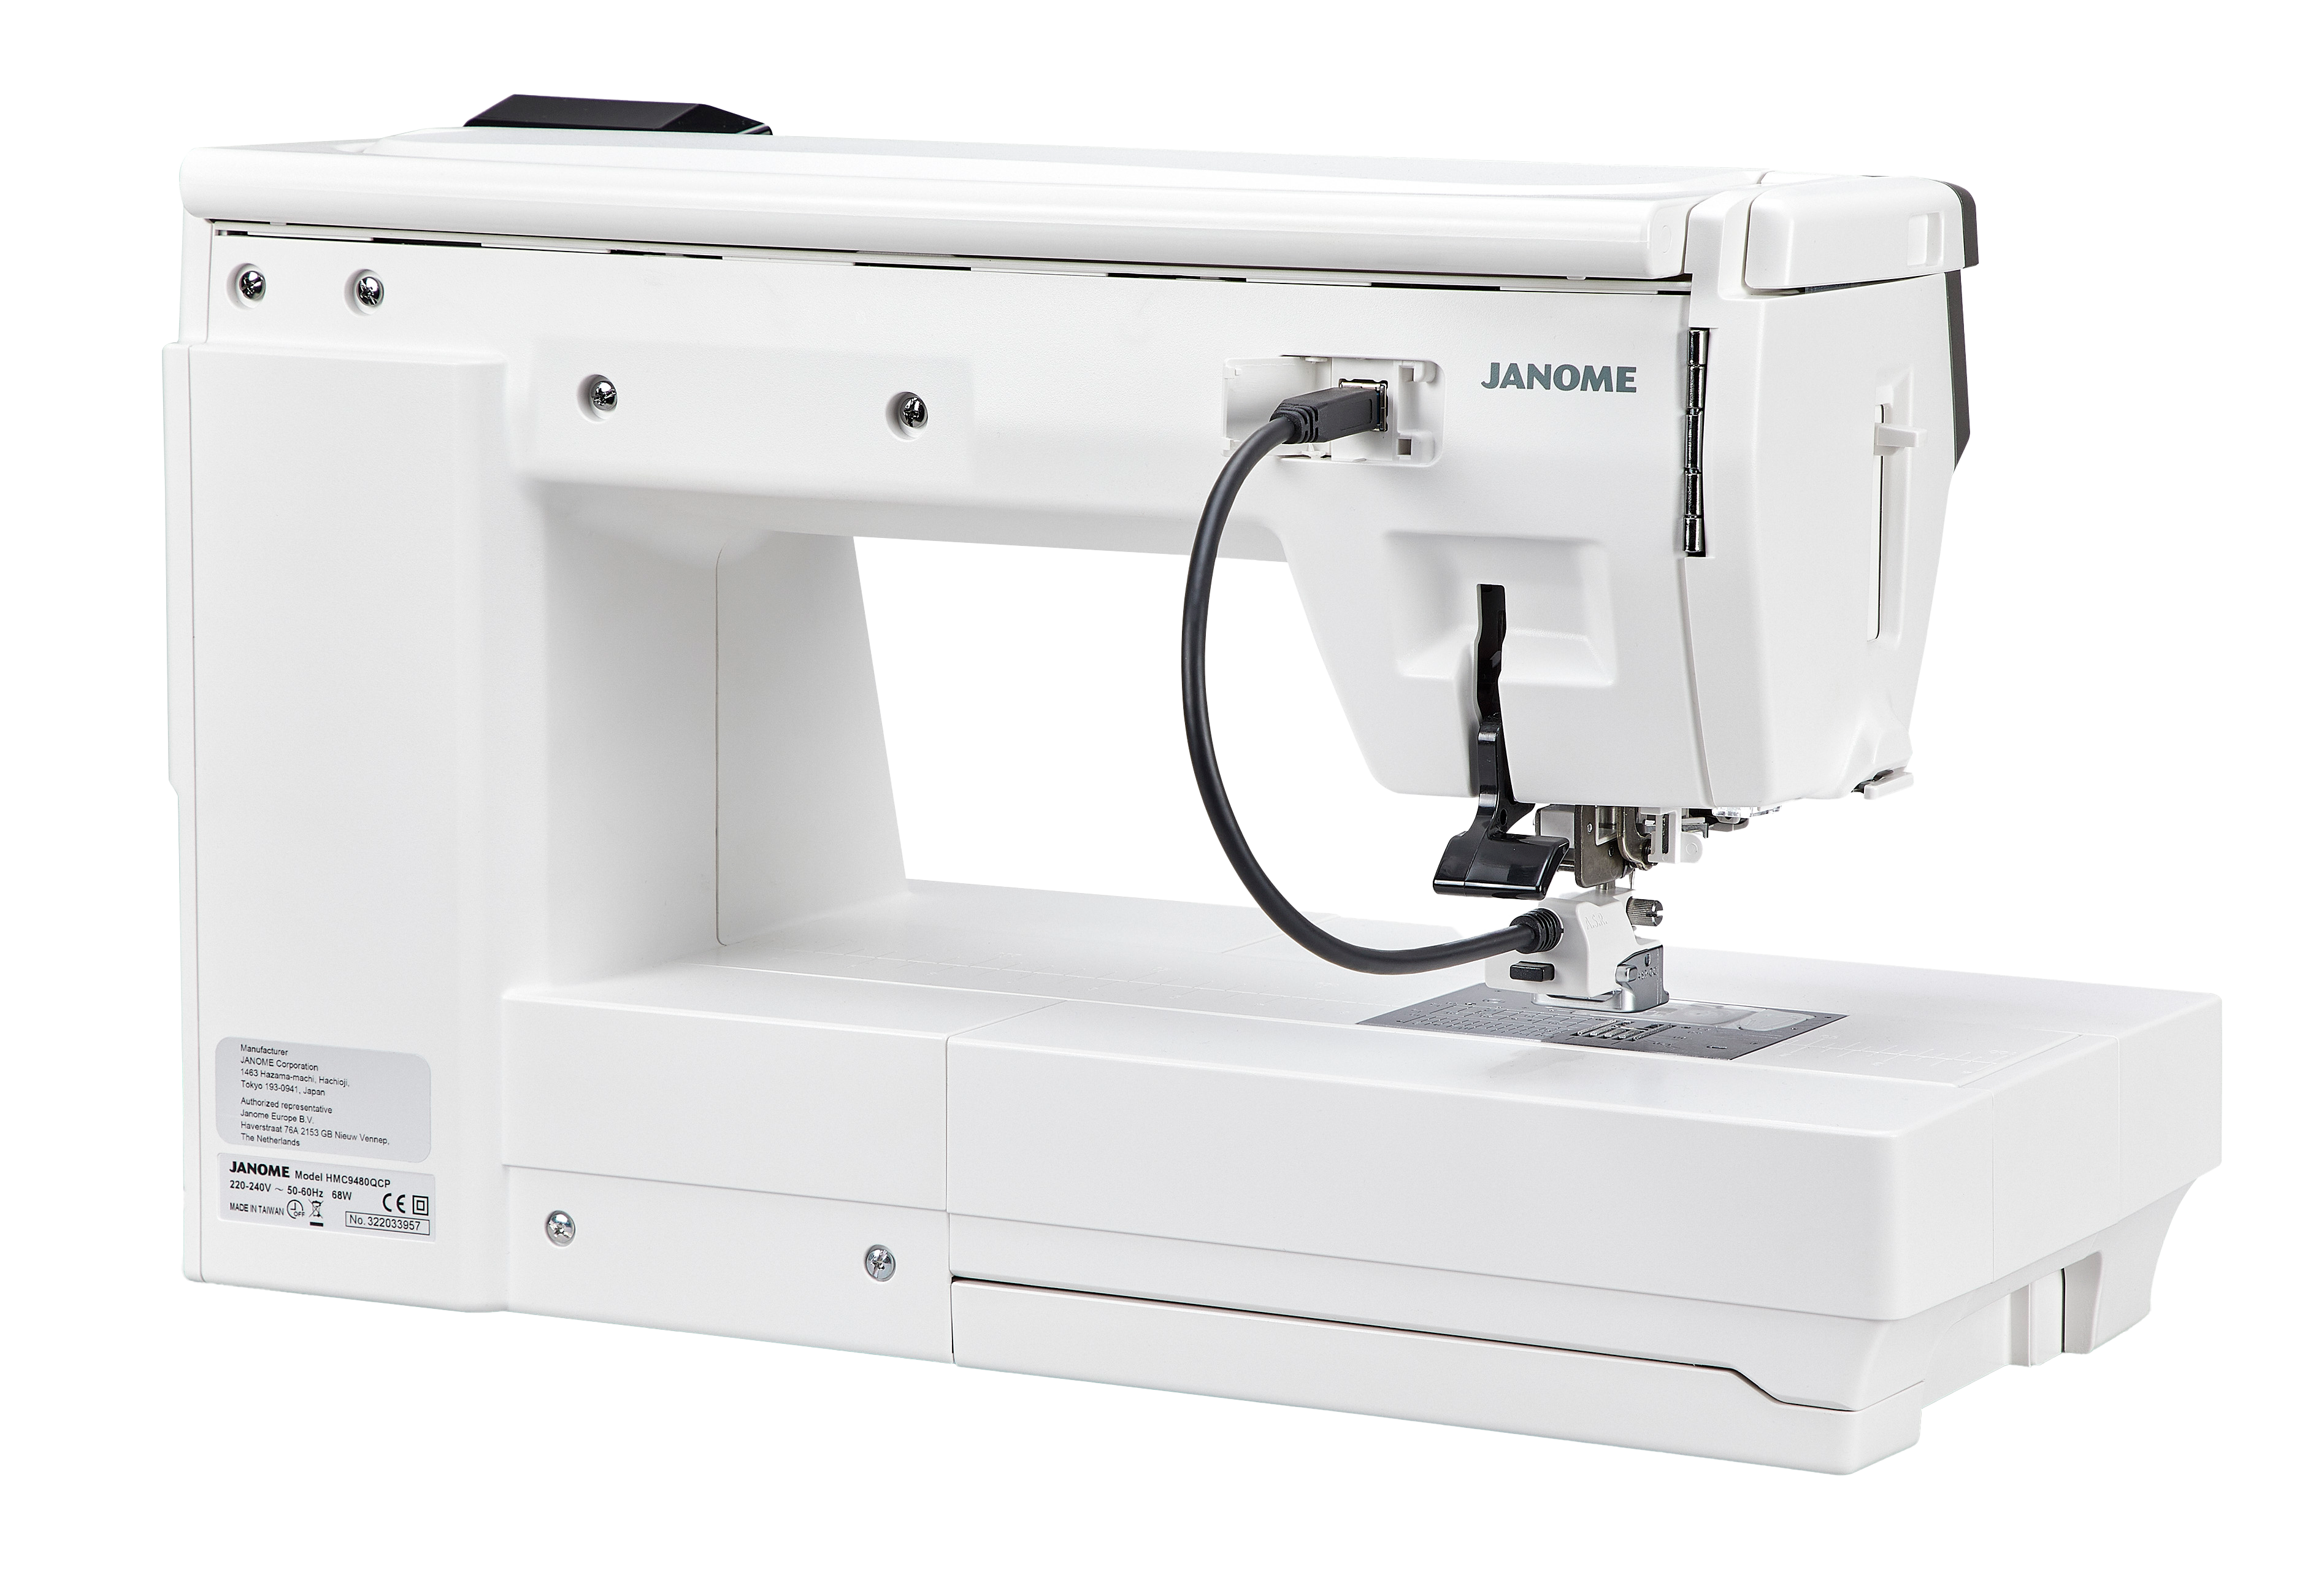 Janome Horizon Memory Craft 9480QCP Sewing Machine for Sale at World Weidner